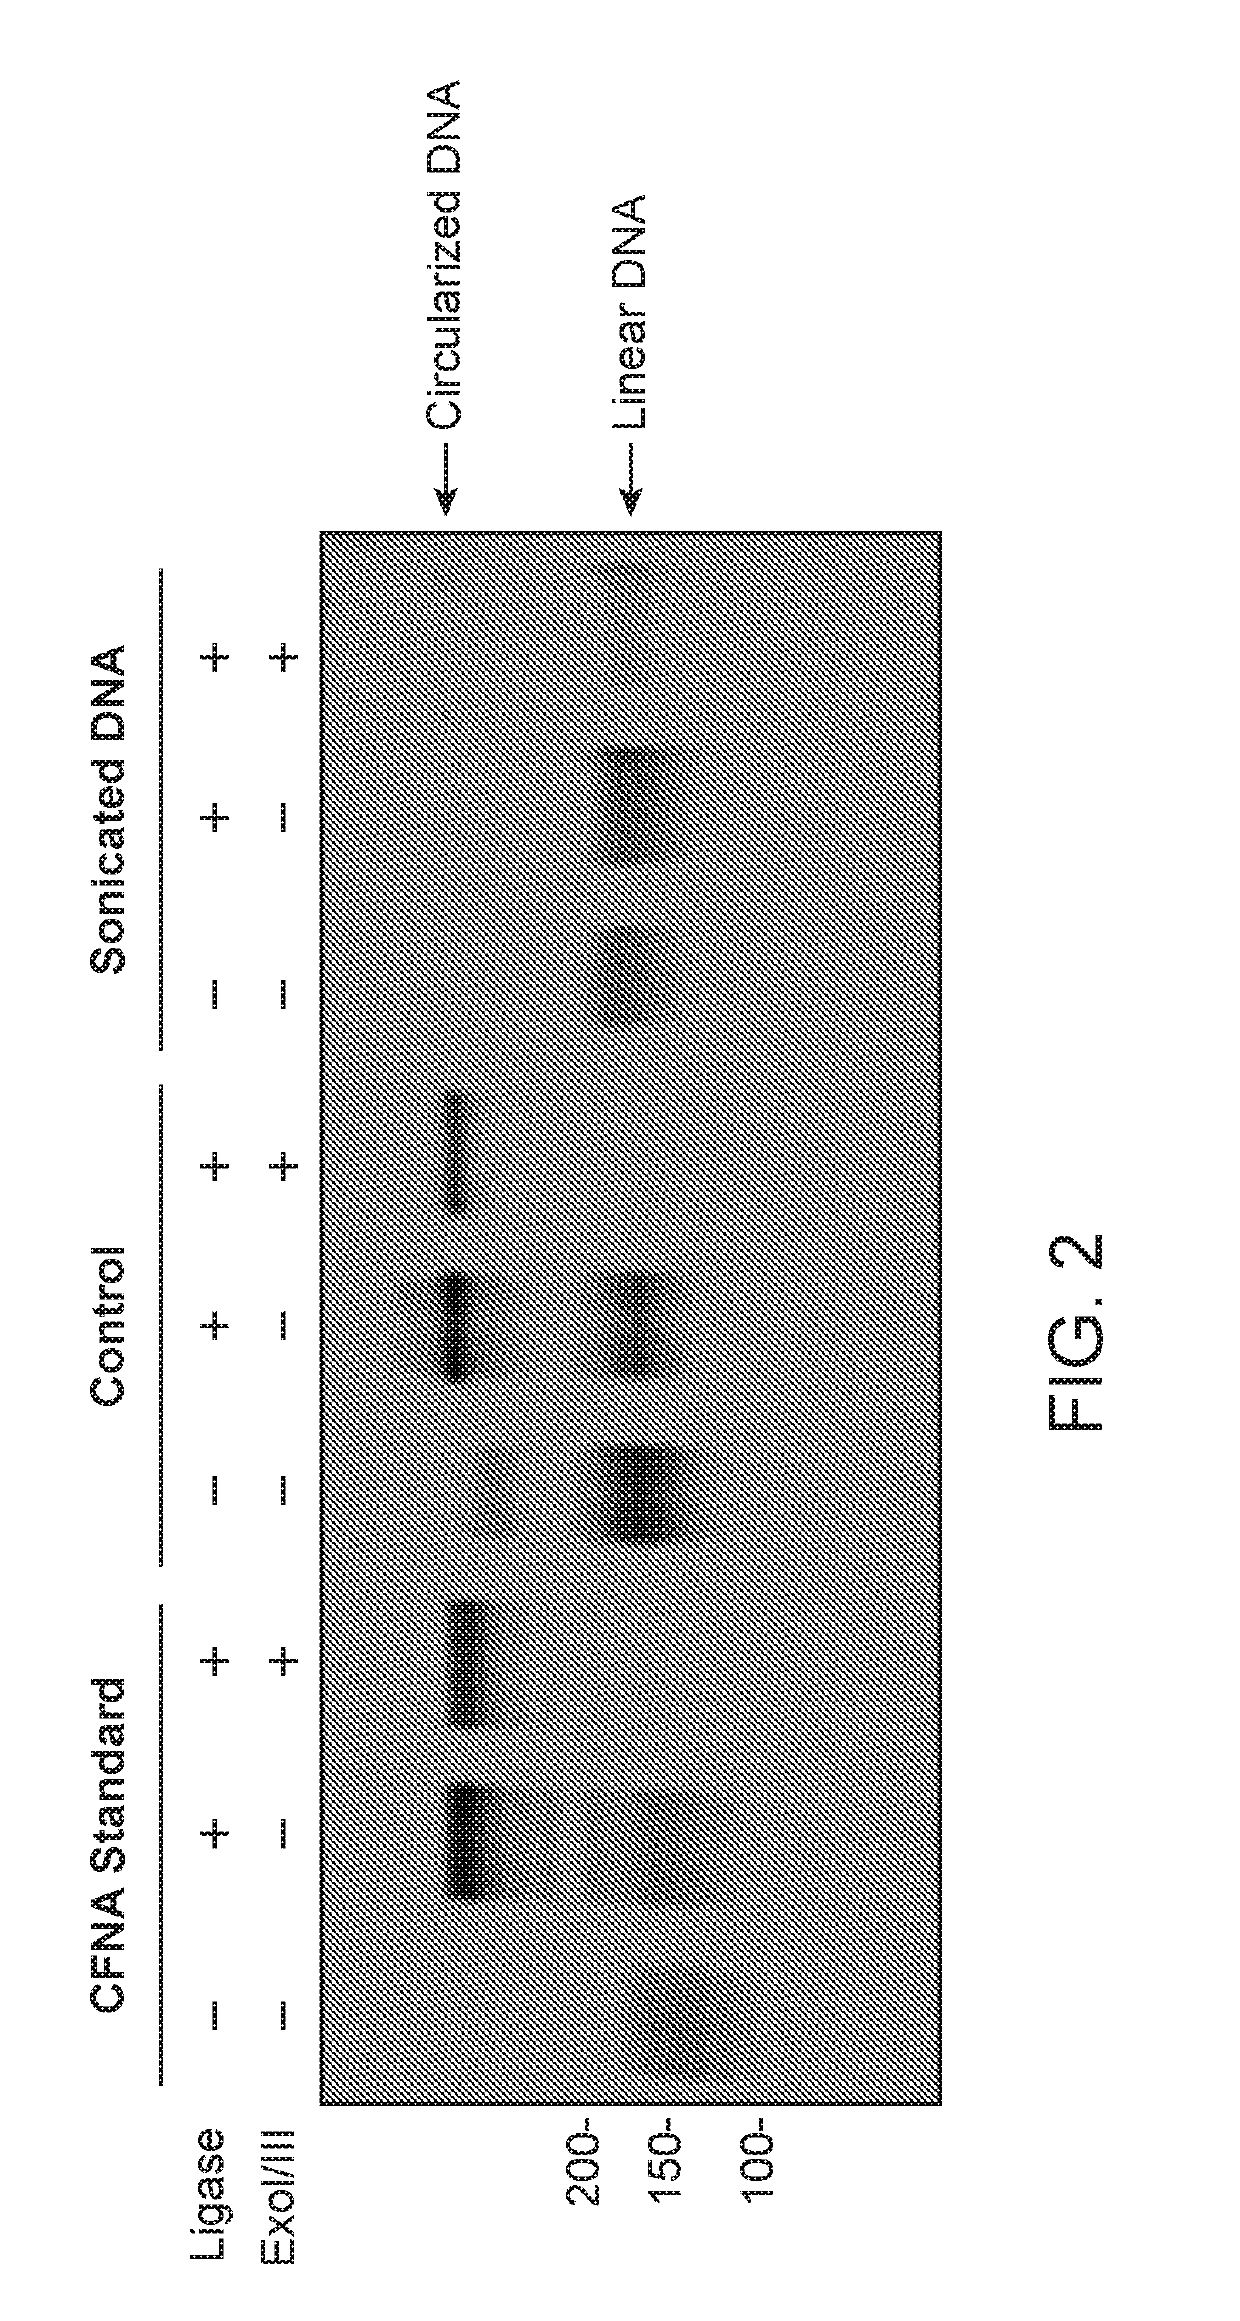 Cell-free nucleic acid standards and uses thereof